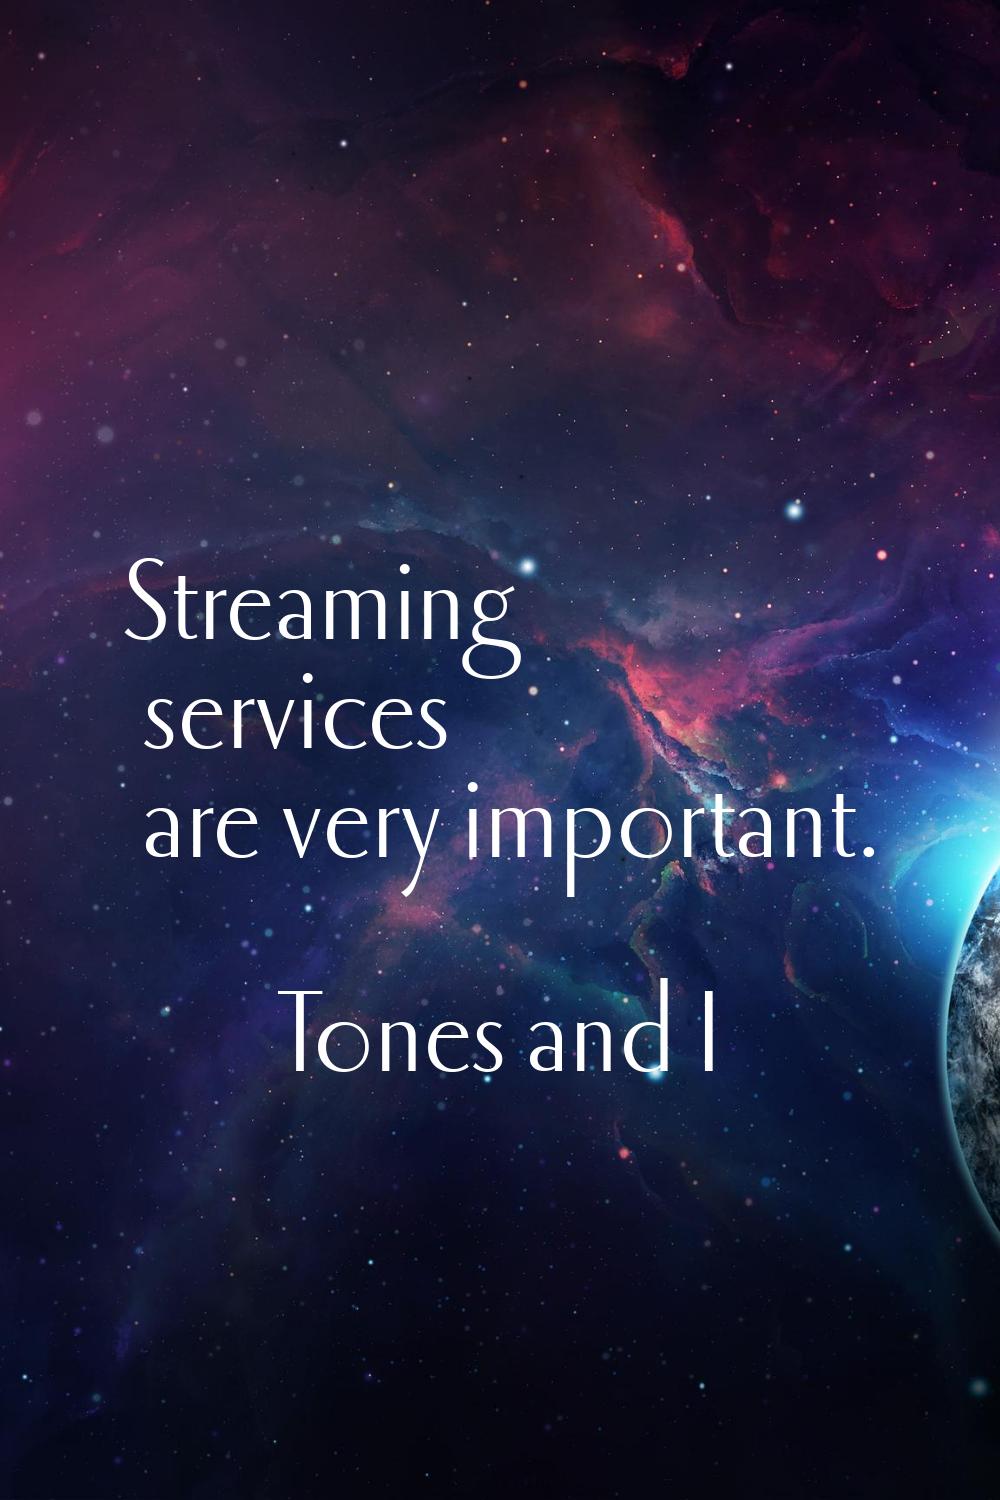 Streaming services are very important.